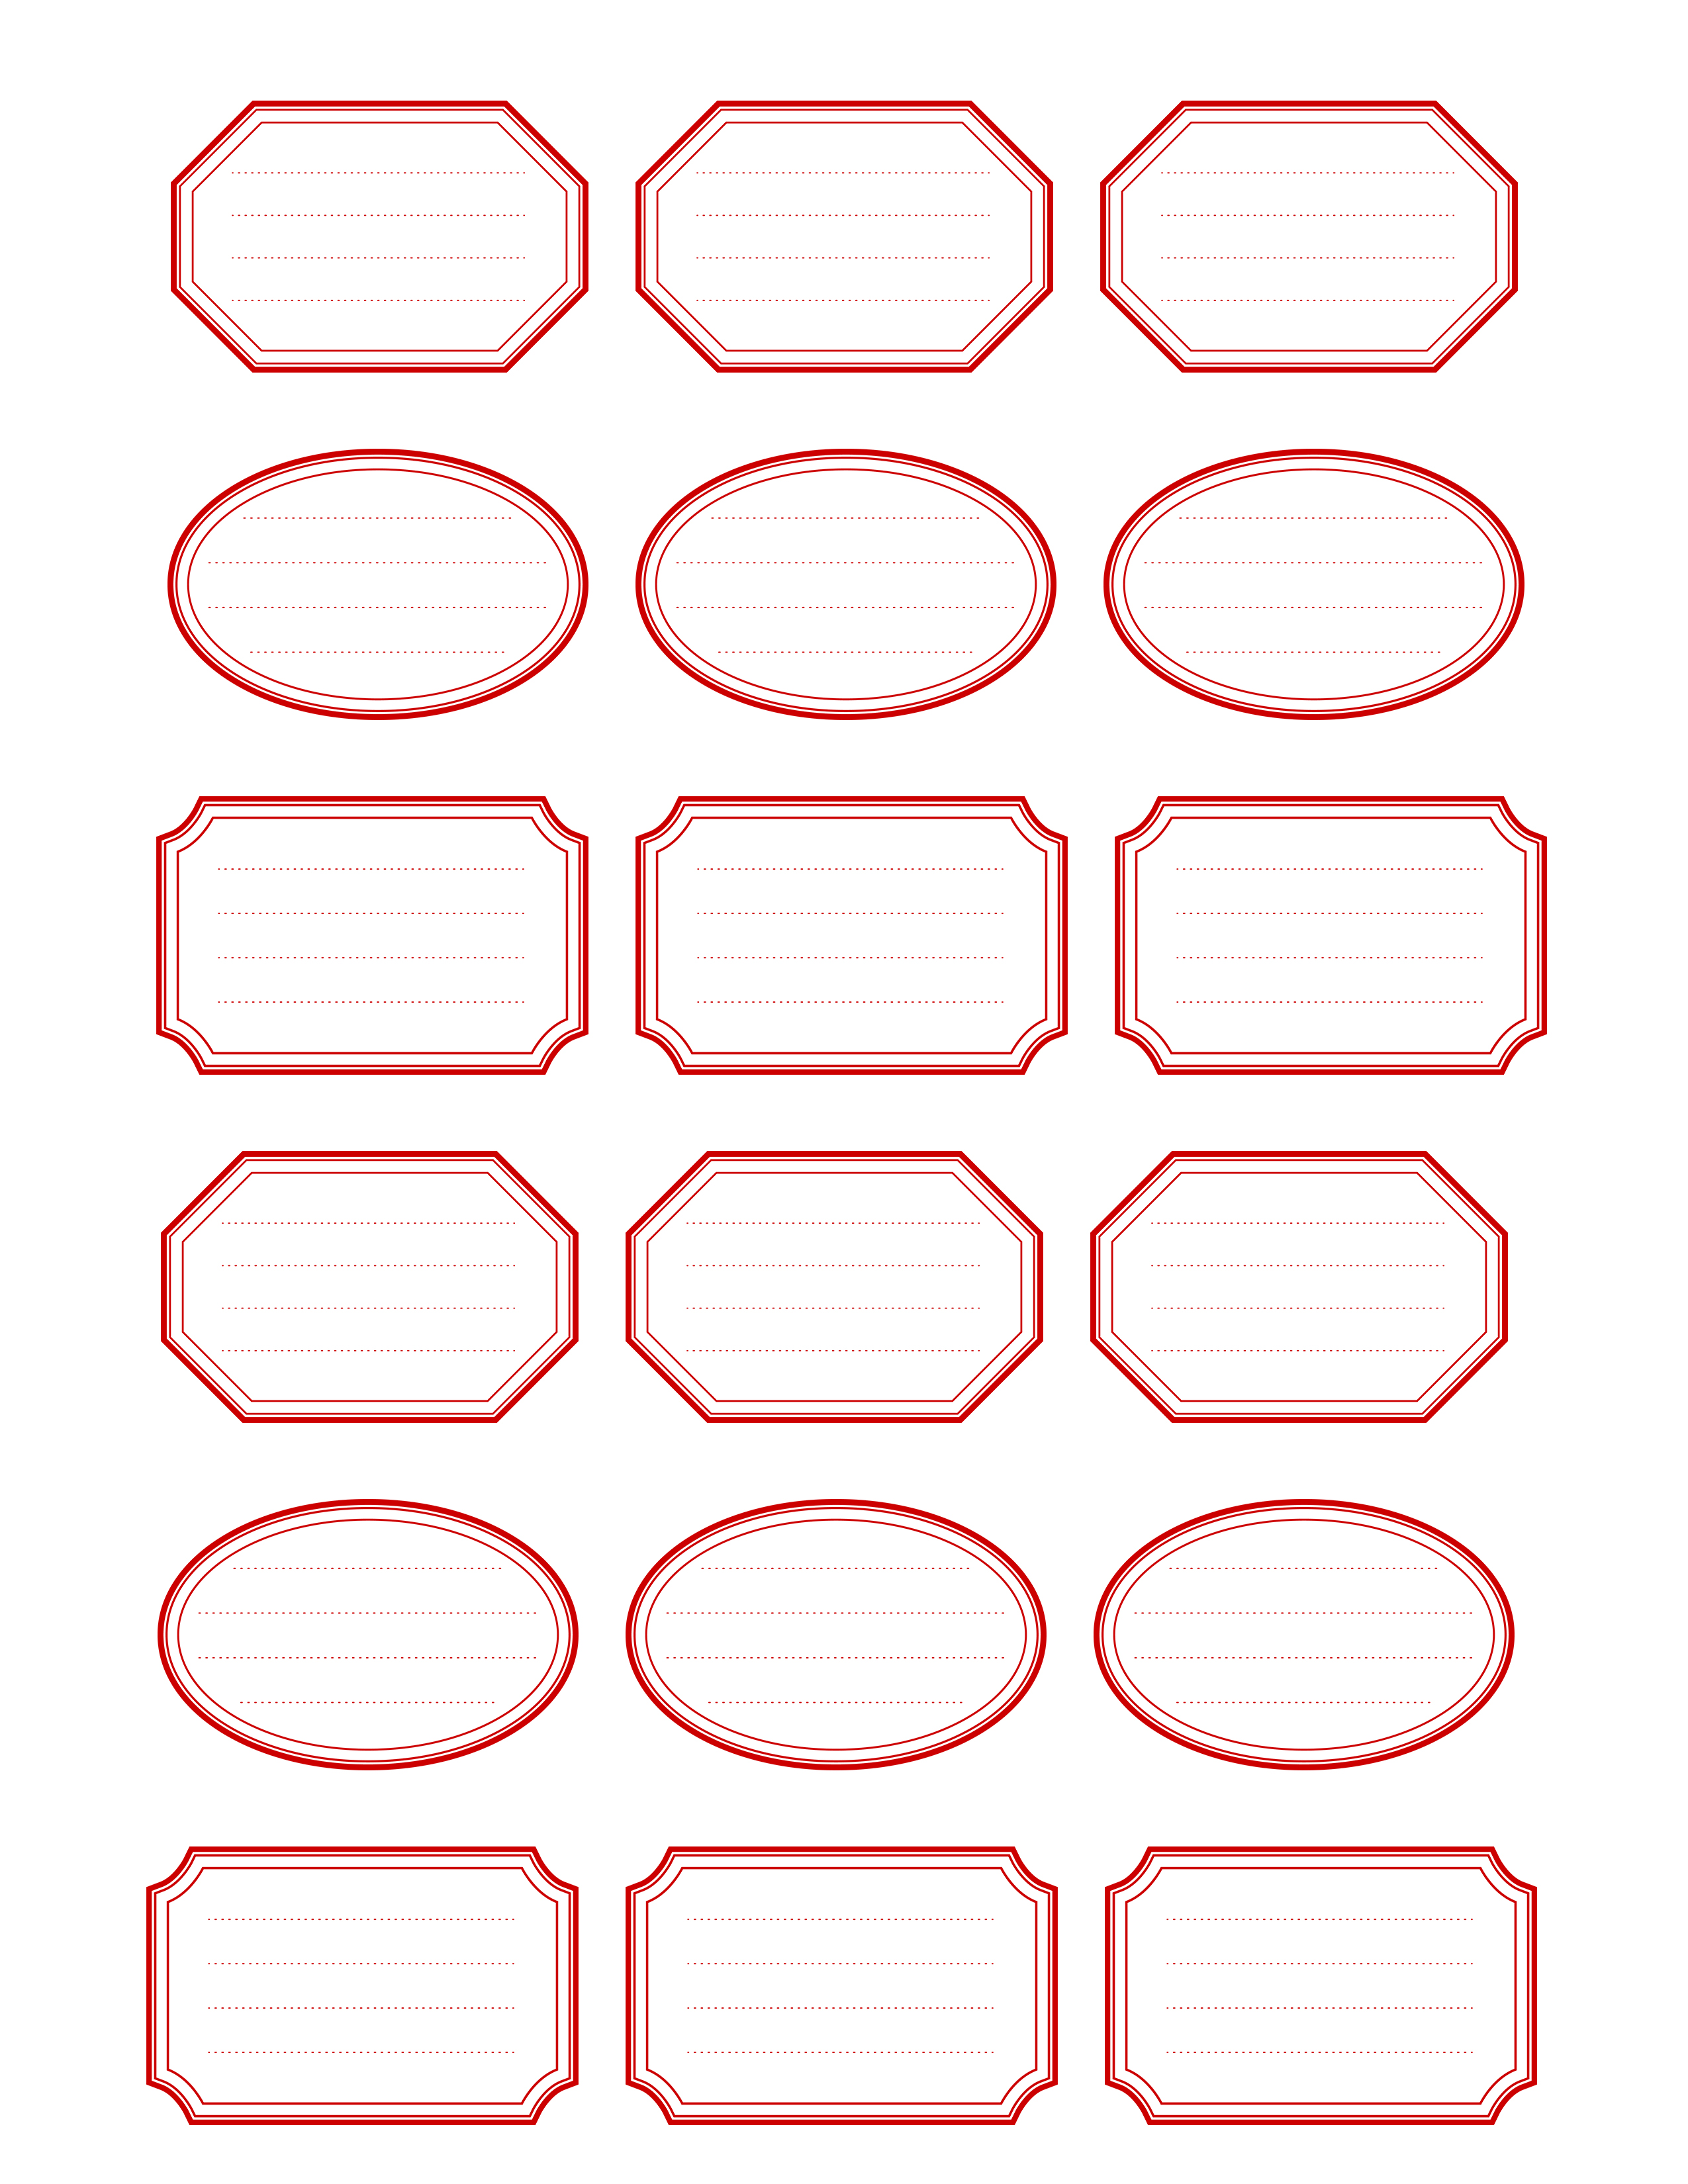 7 Best Images Of Free Printable Labels 1 Oval Label Free Printables 